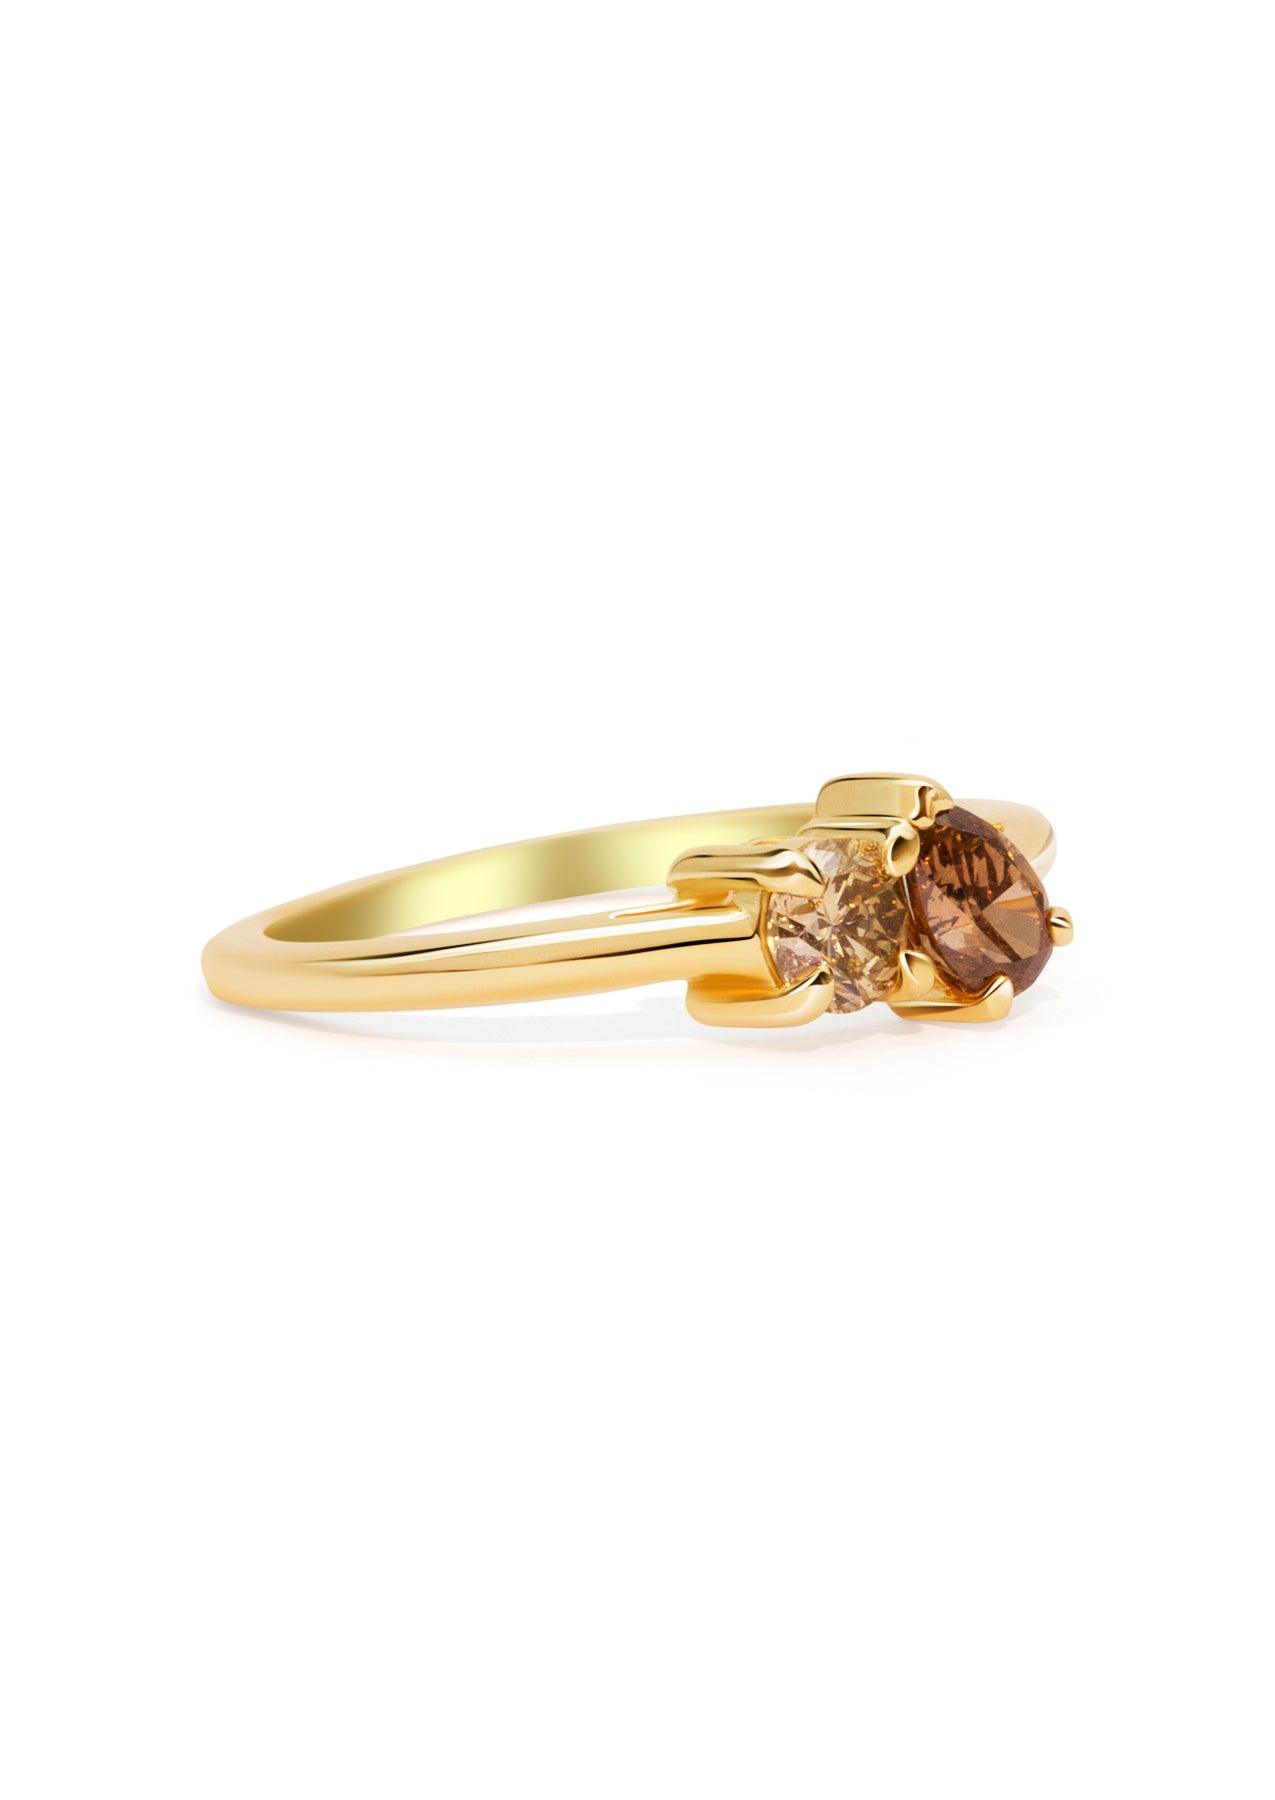 The Toi Et Moi 0.3ct Champagne and 0.37ct Cognac Diamond Ring